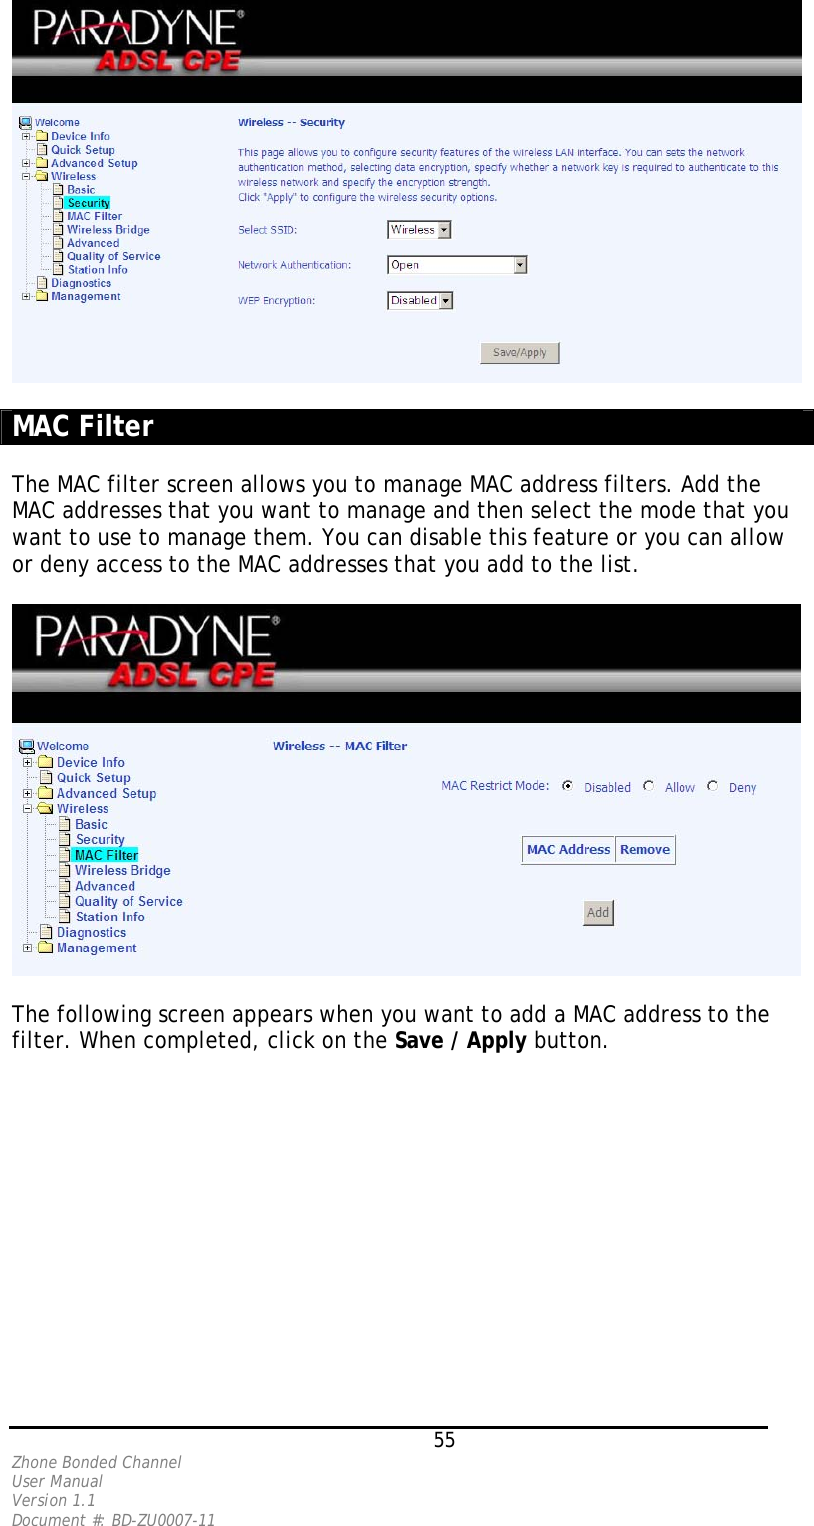   MAC Filter  The MAC filter screen allows you to manage MAC address filters. Add the MAC addresses that you want to manage and then select the mode that you want to use to manage them. You can disable this feature or you can allow or deny access to the MAC addresses that you add to the list.     The following screen appears when you want to add a MAC address to the filter. When completed, click on the Save / Apply button.    55 Zhone Bonded Channel User Manual  Version 1.1 Document #: BD-ZU0007-11 